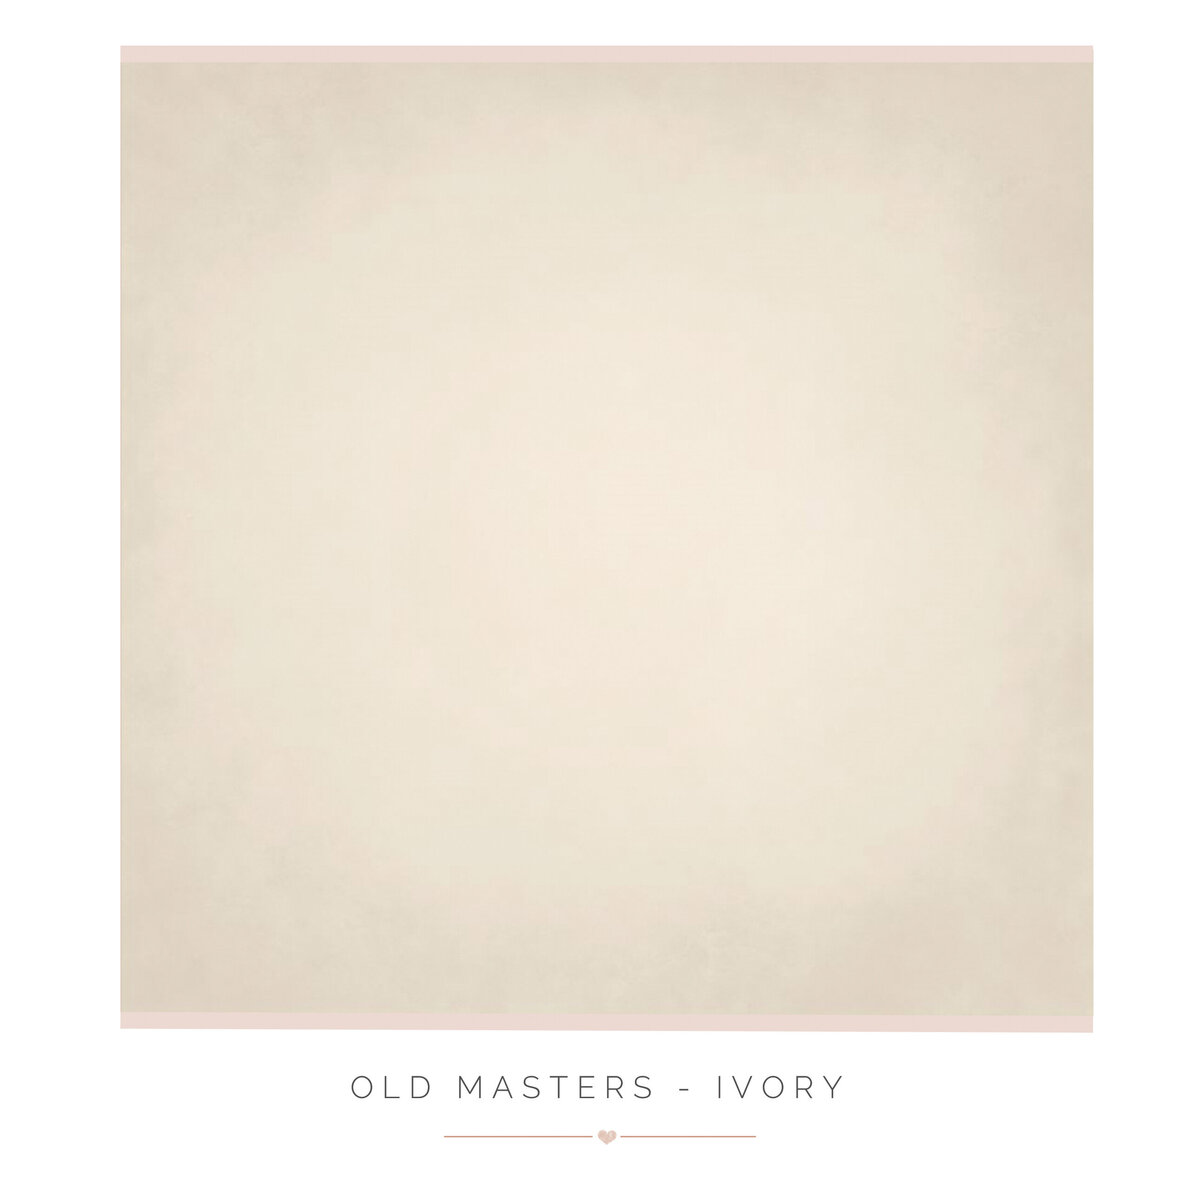 Old Masters - Ivory